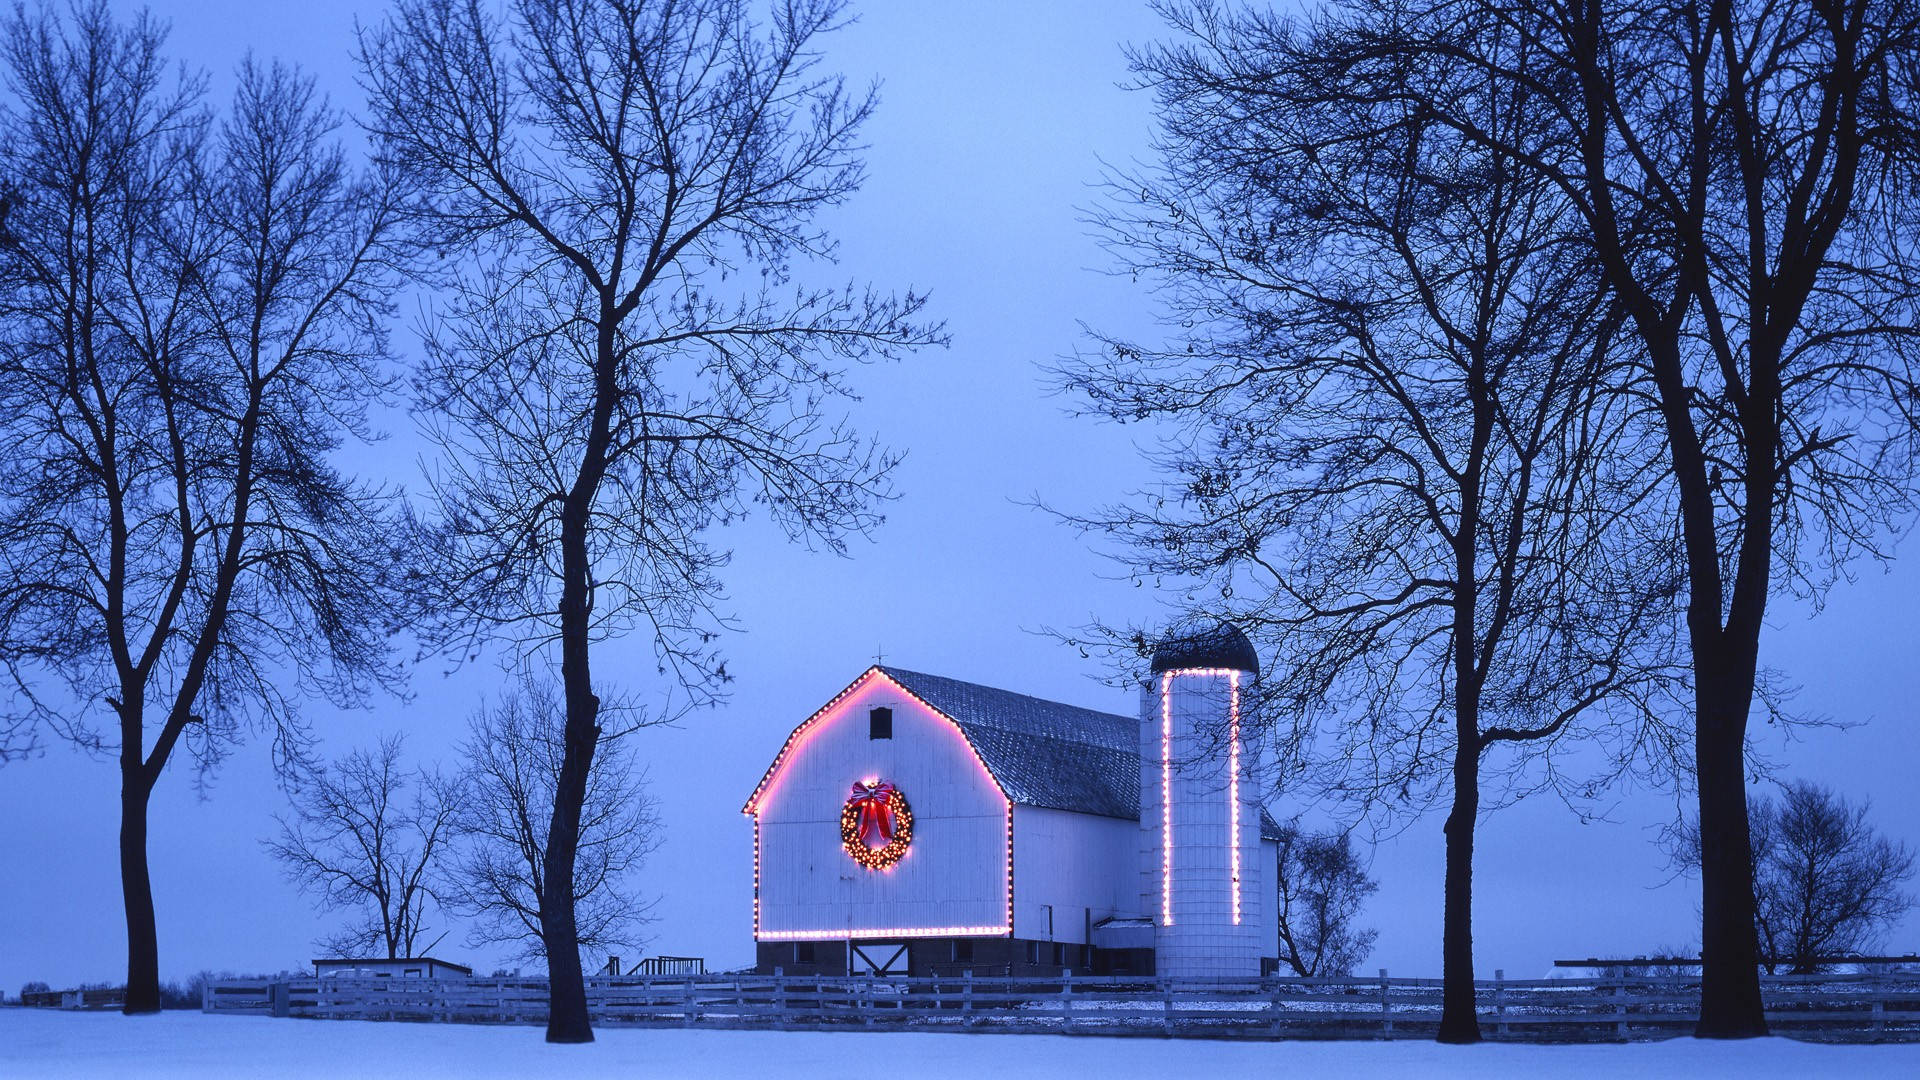 A Barn With A Christmas Tree In The Snow Wallpaper